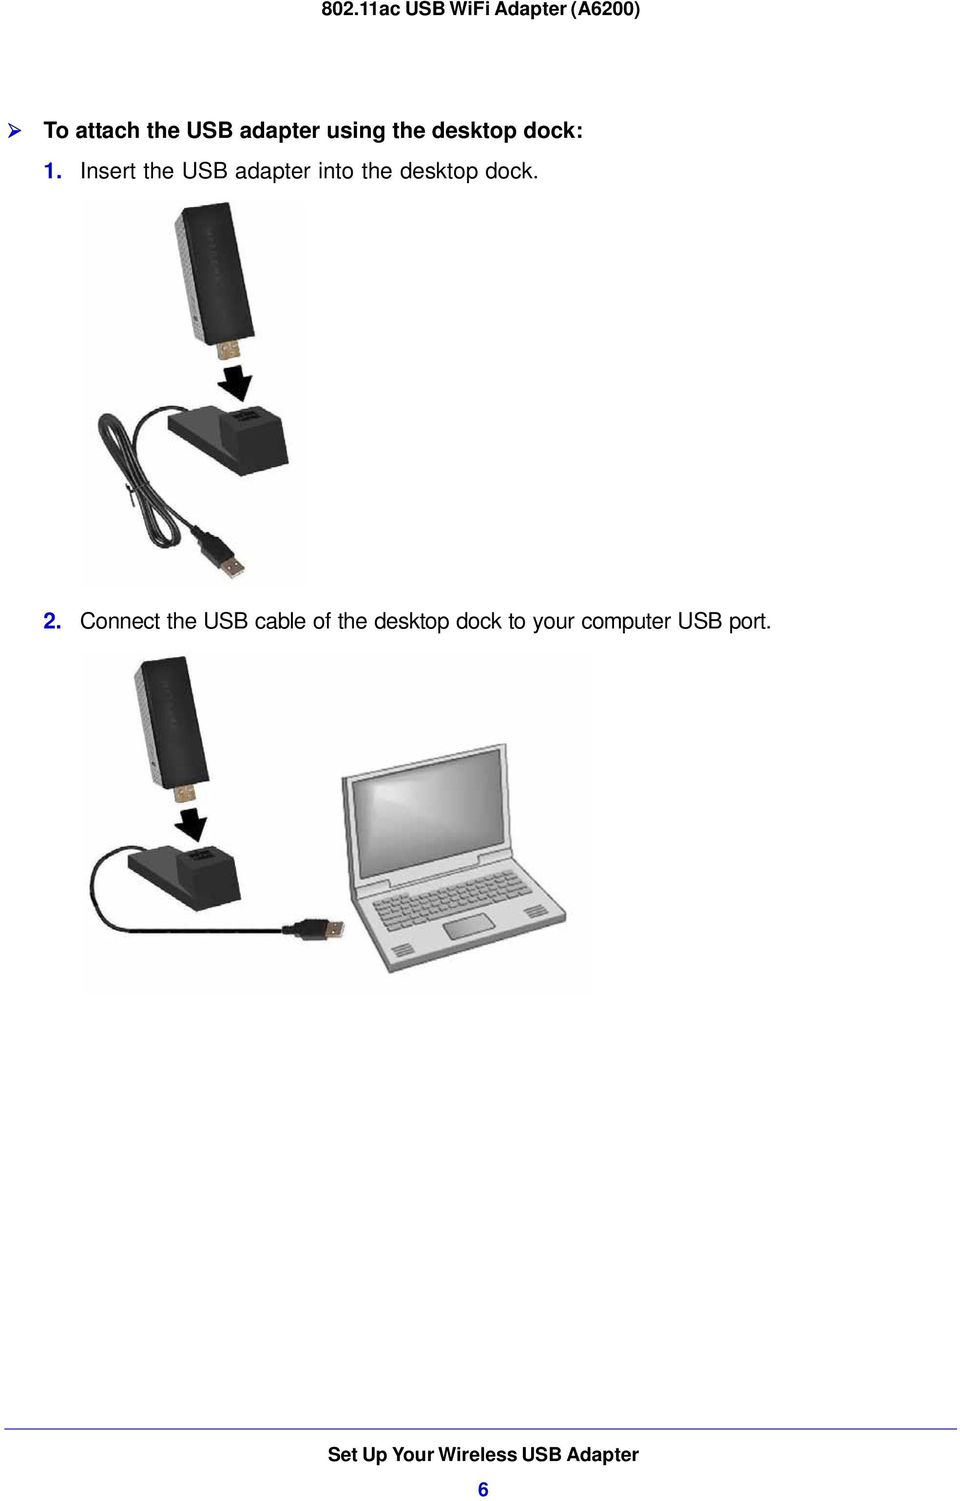 Connect the USB cable of the desktop dock to your